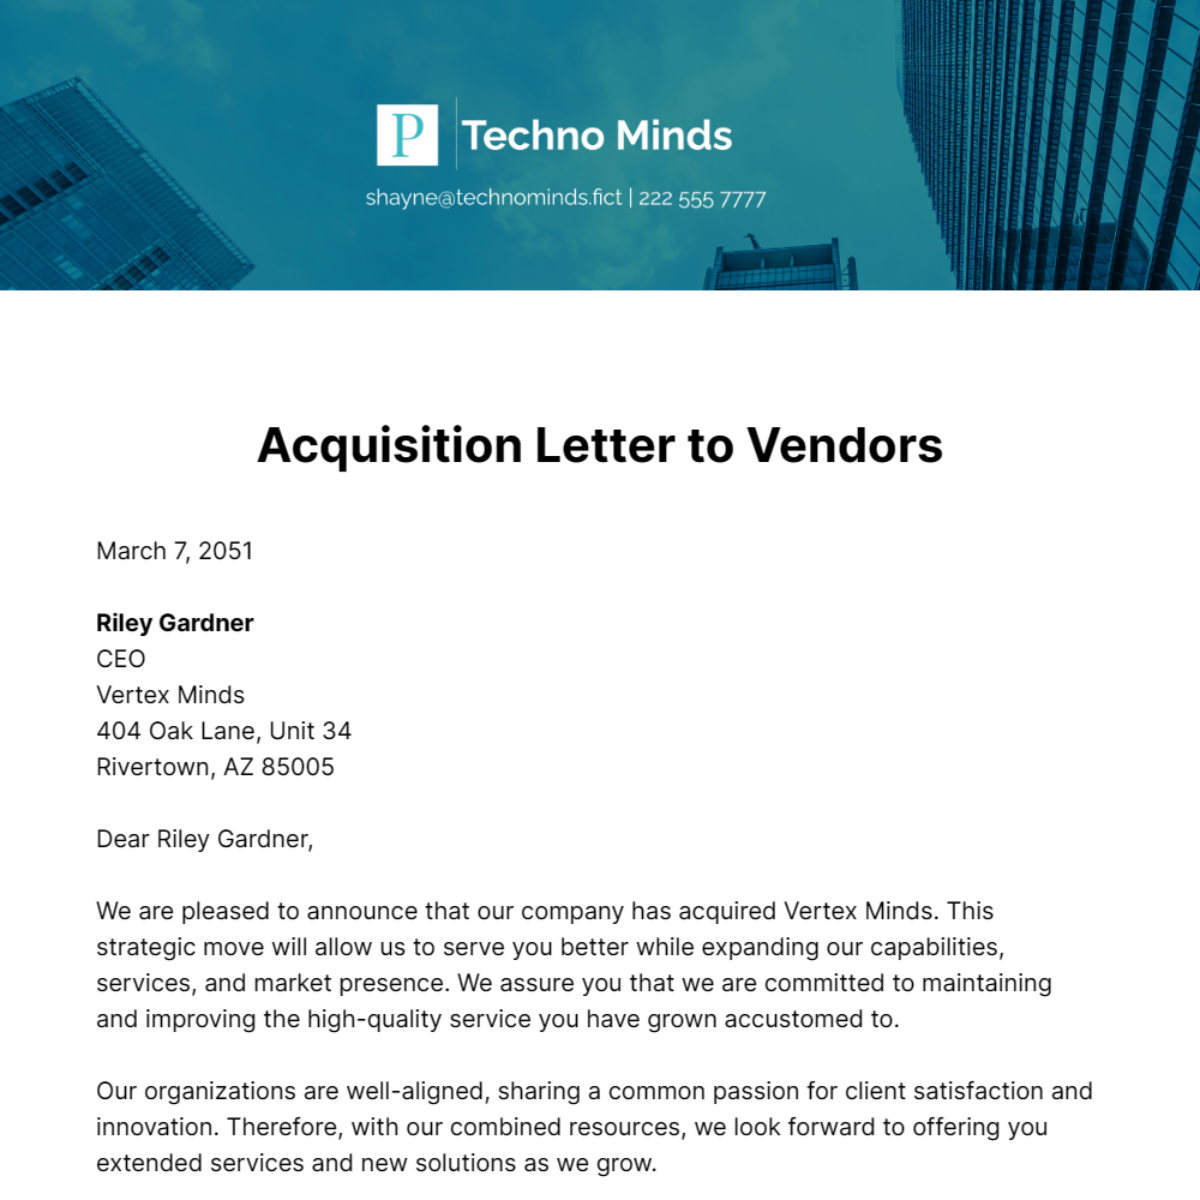 Free Acquisition Letter of Vendors Template